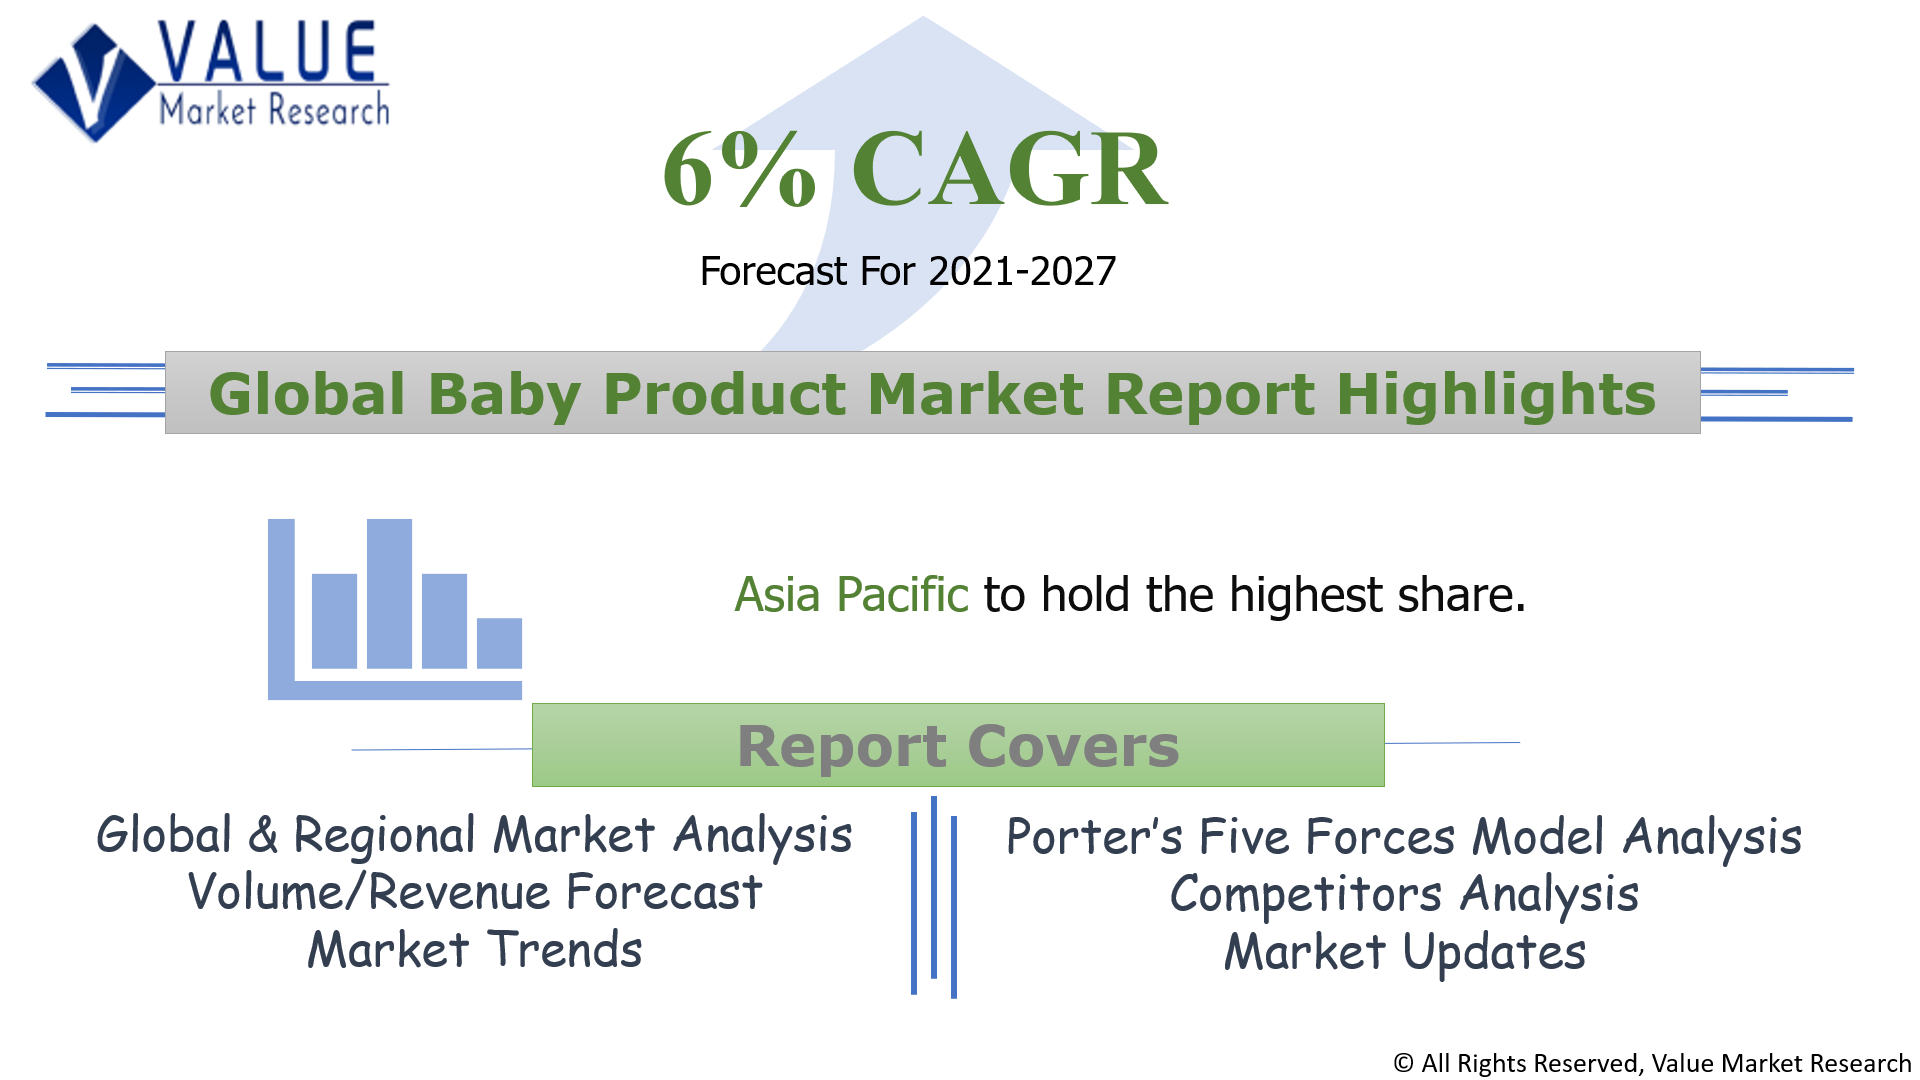 Global Baby Product Market Share